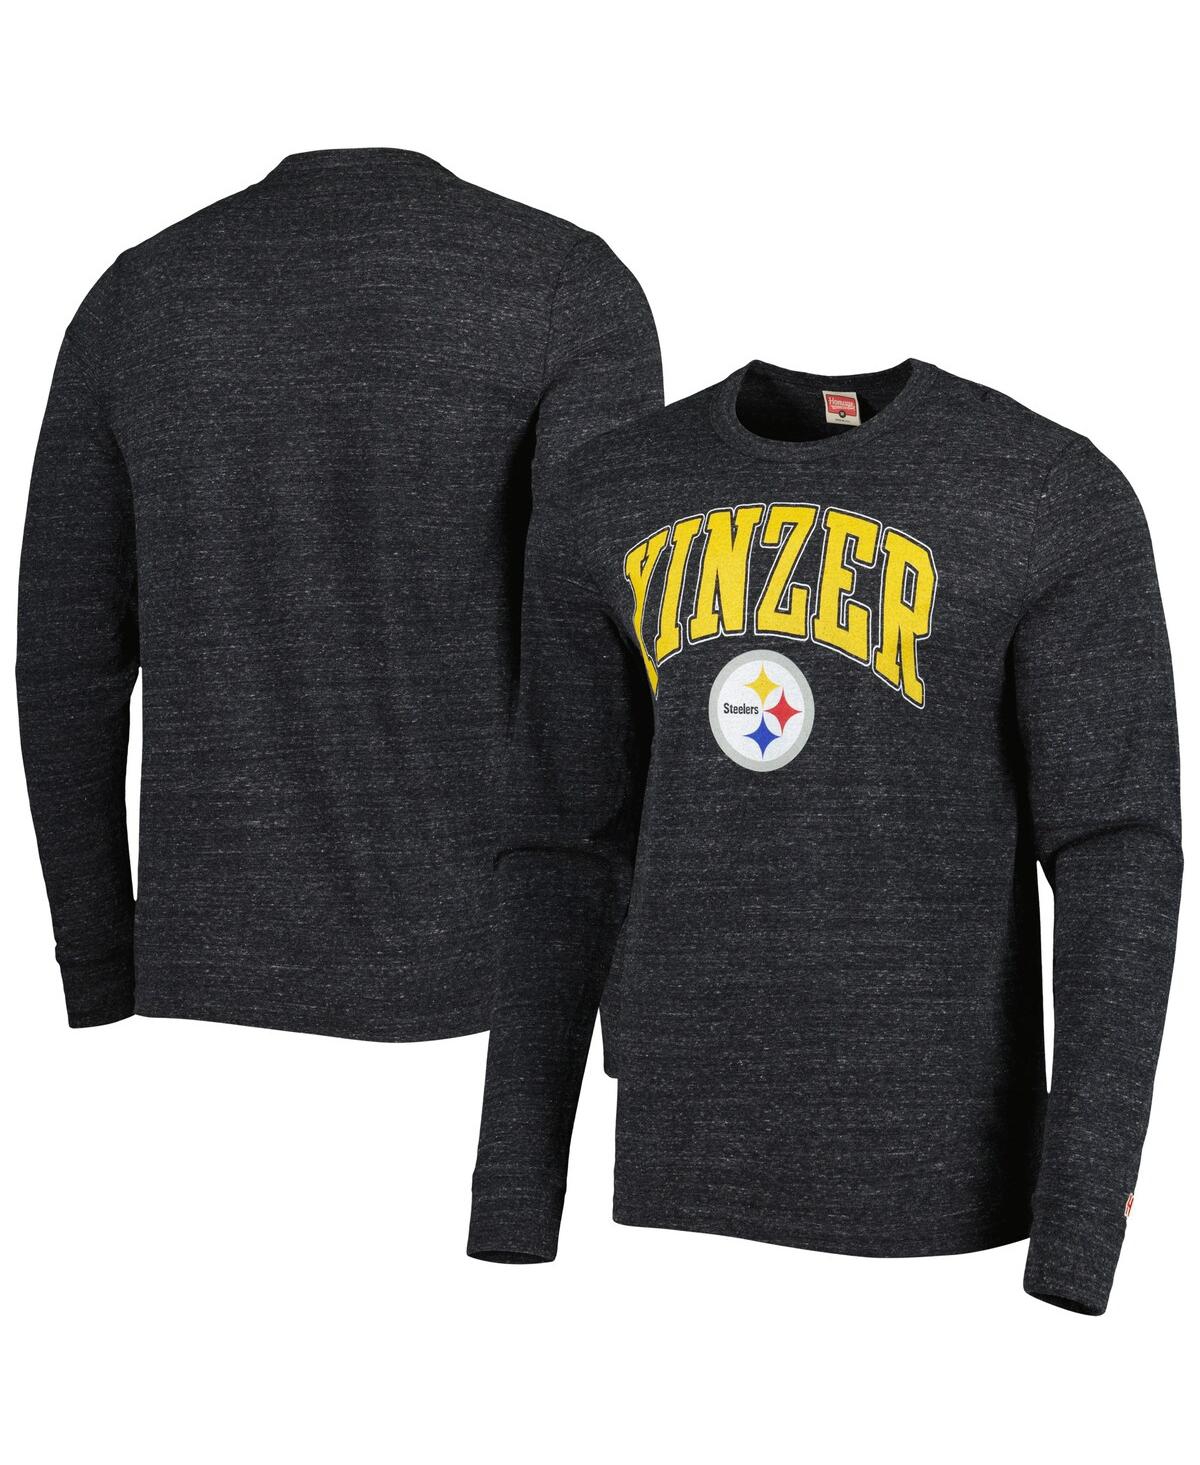 HOMAGE MEN'S HOMAGE CHARCOAL PITTSBURGH STEELERS HYPER LOCAL TRI-BLEND LONG SLEEVE T-SHIRT